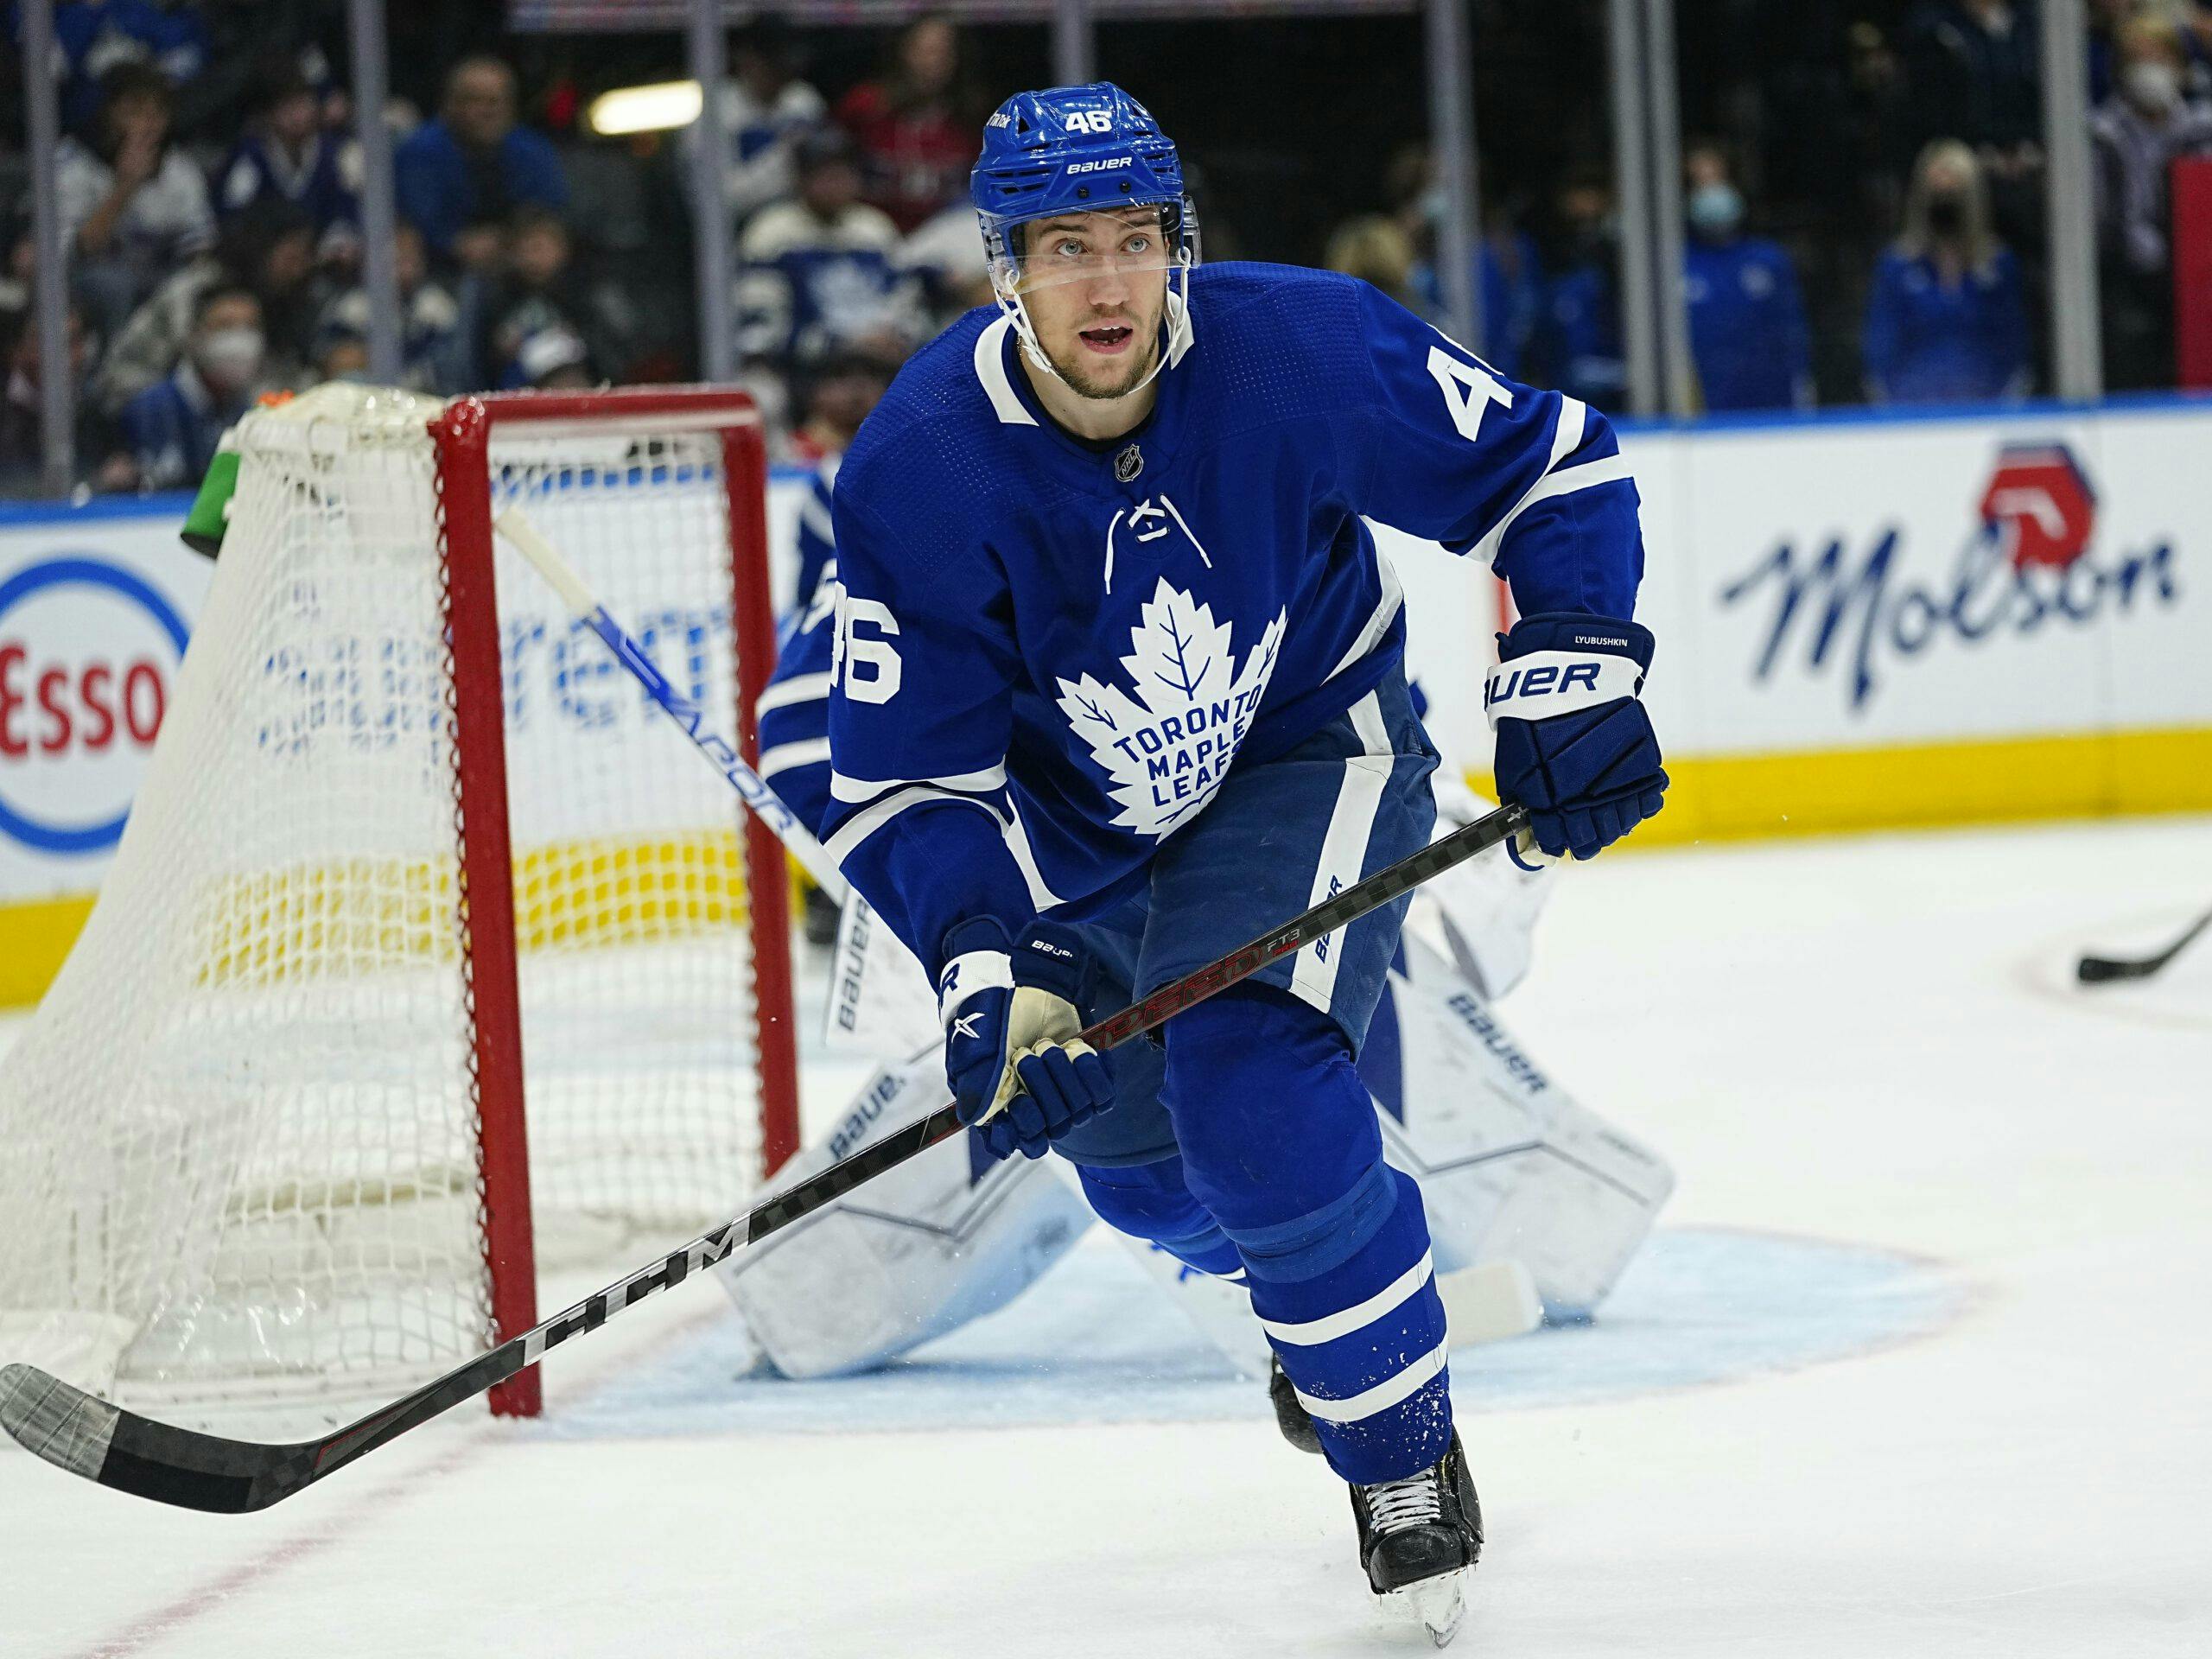 Expect the Toronto Maple Leafs to remain active in trade market after Lyubushkin trade